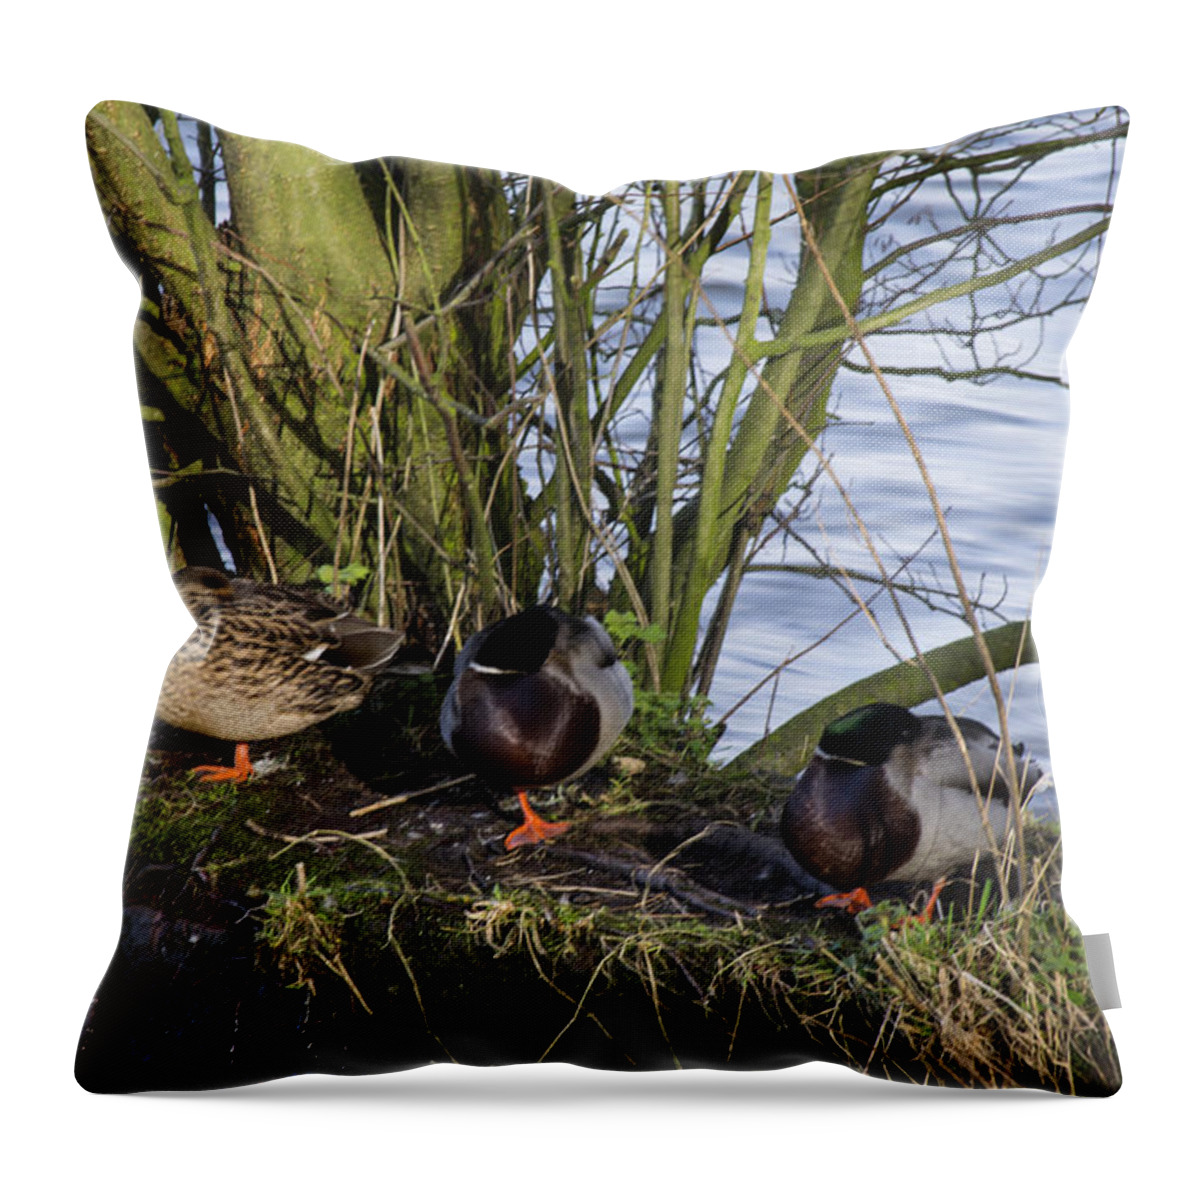  Duck Throw Pillow featuring the photograph Three In A Row by Spikey Mouse Photography